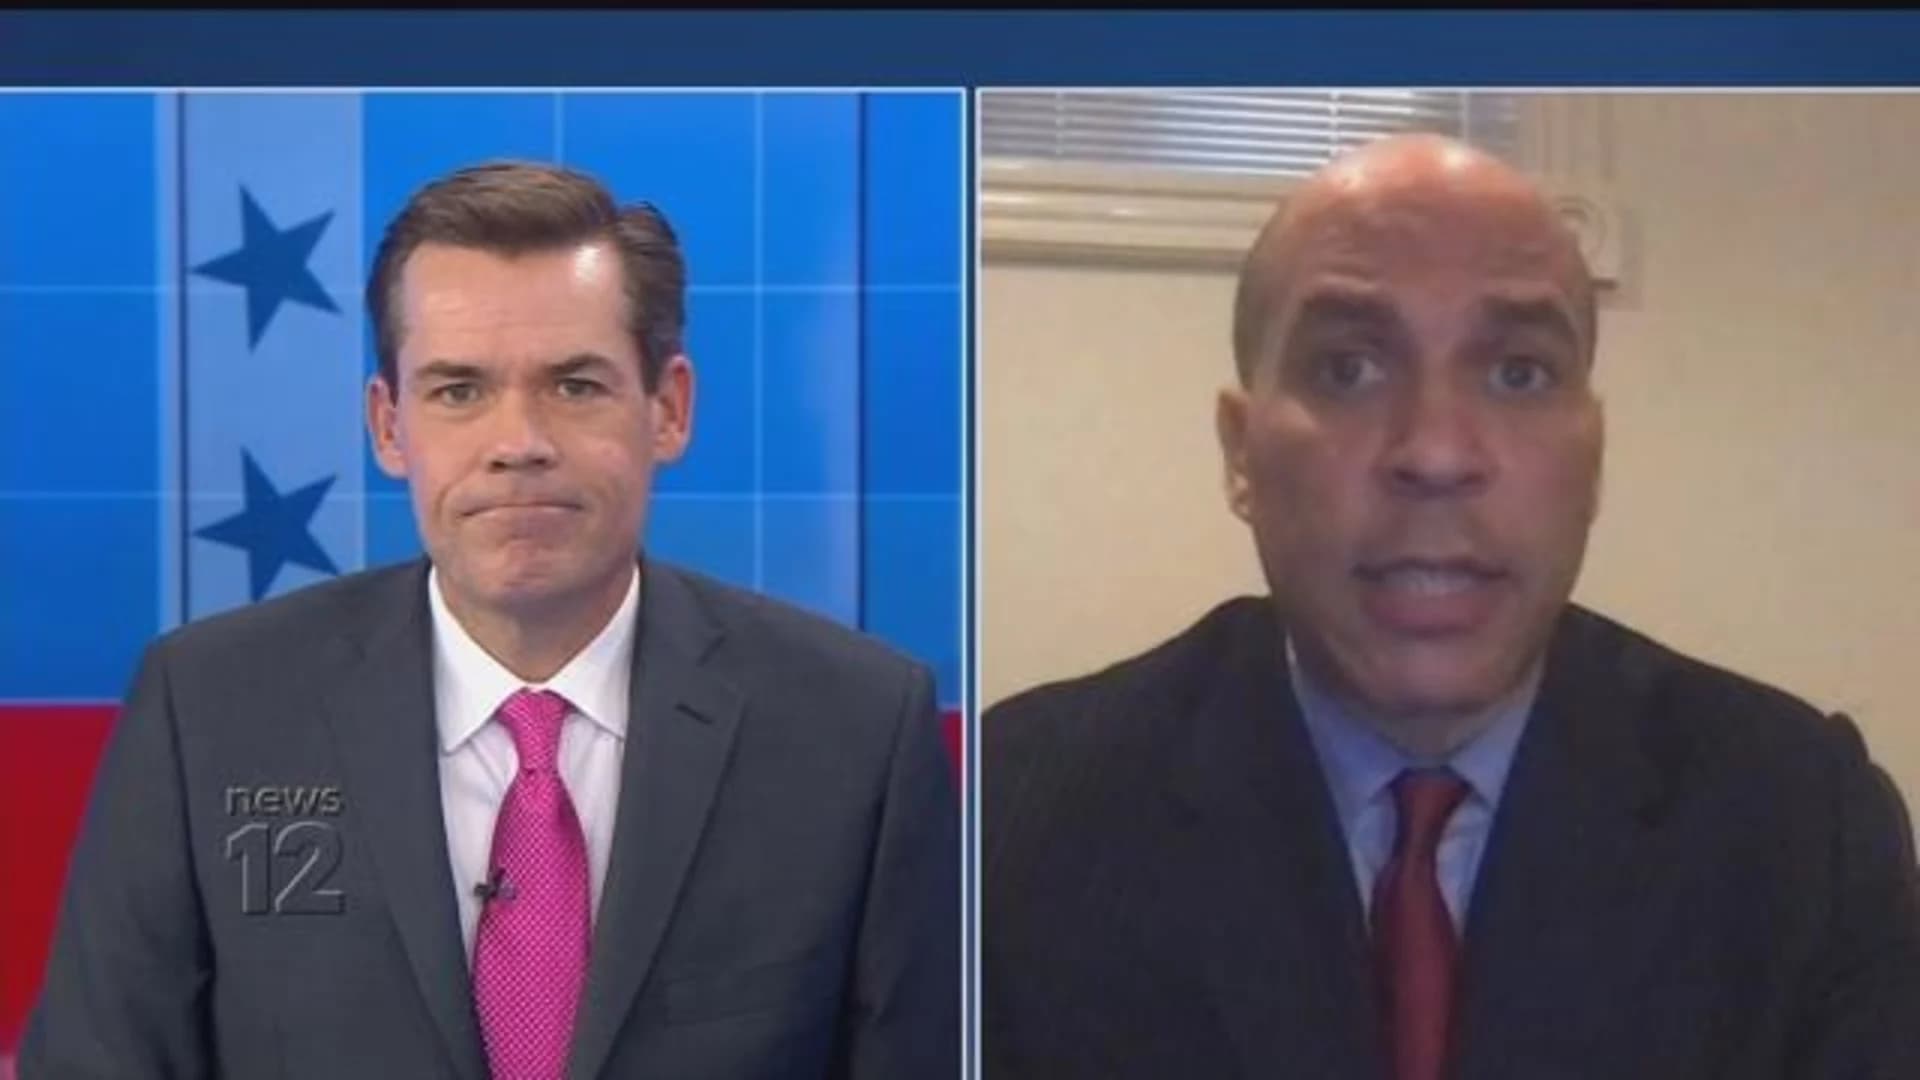 WATCH: Sen. Booker answers questions about the COVID-19 pandemic